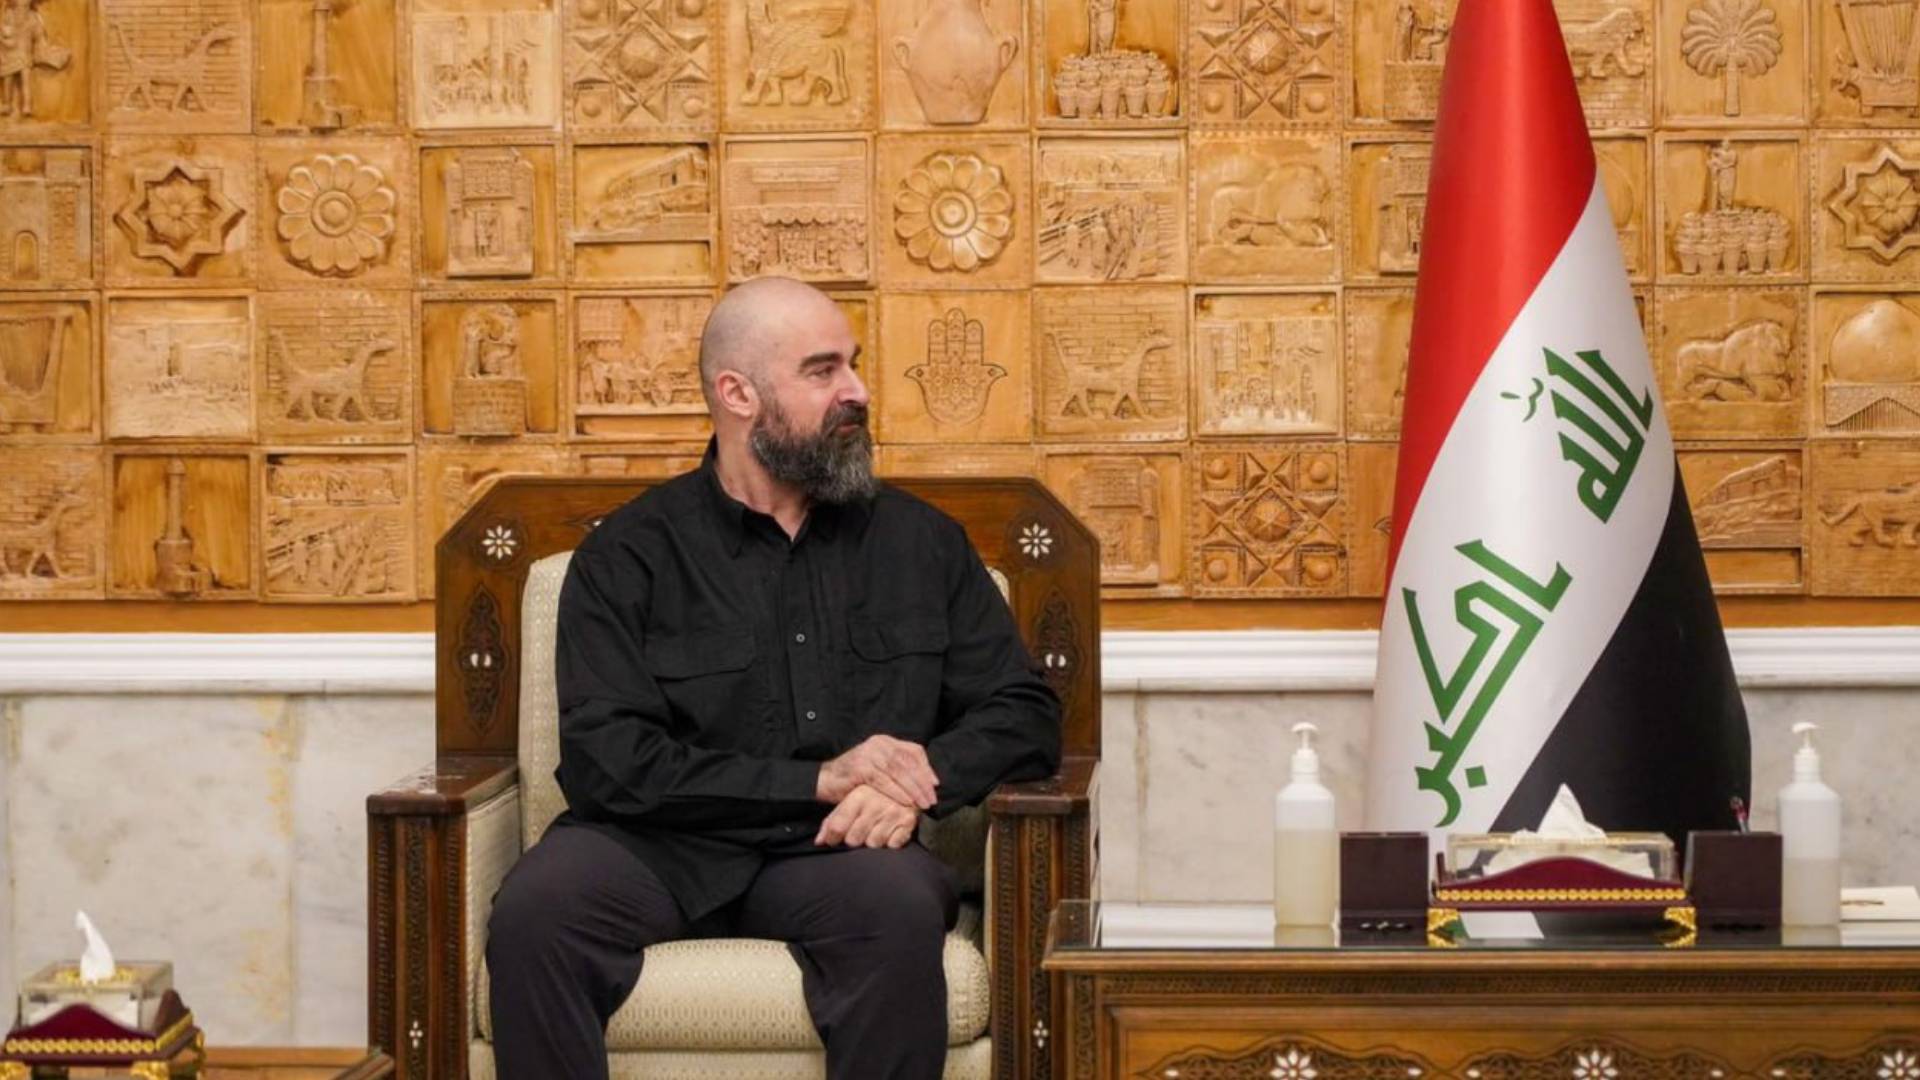 President Bafel Jalal Talabani at one of his meetings with political leaders of Iraq